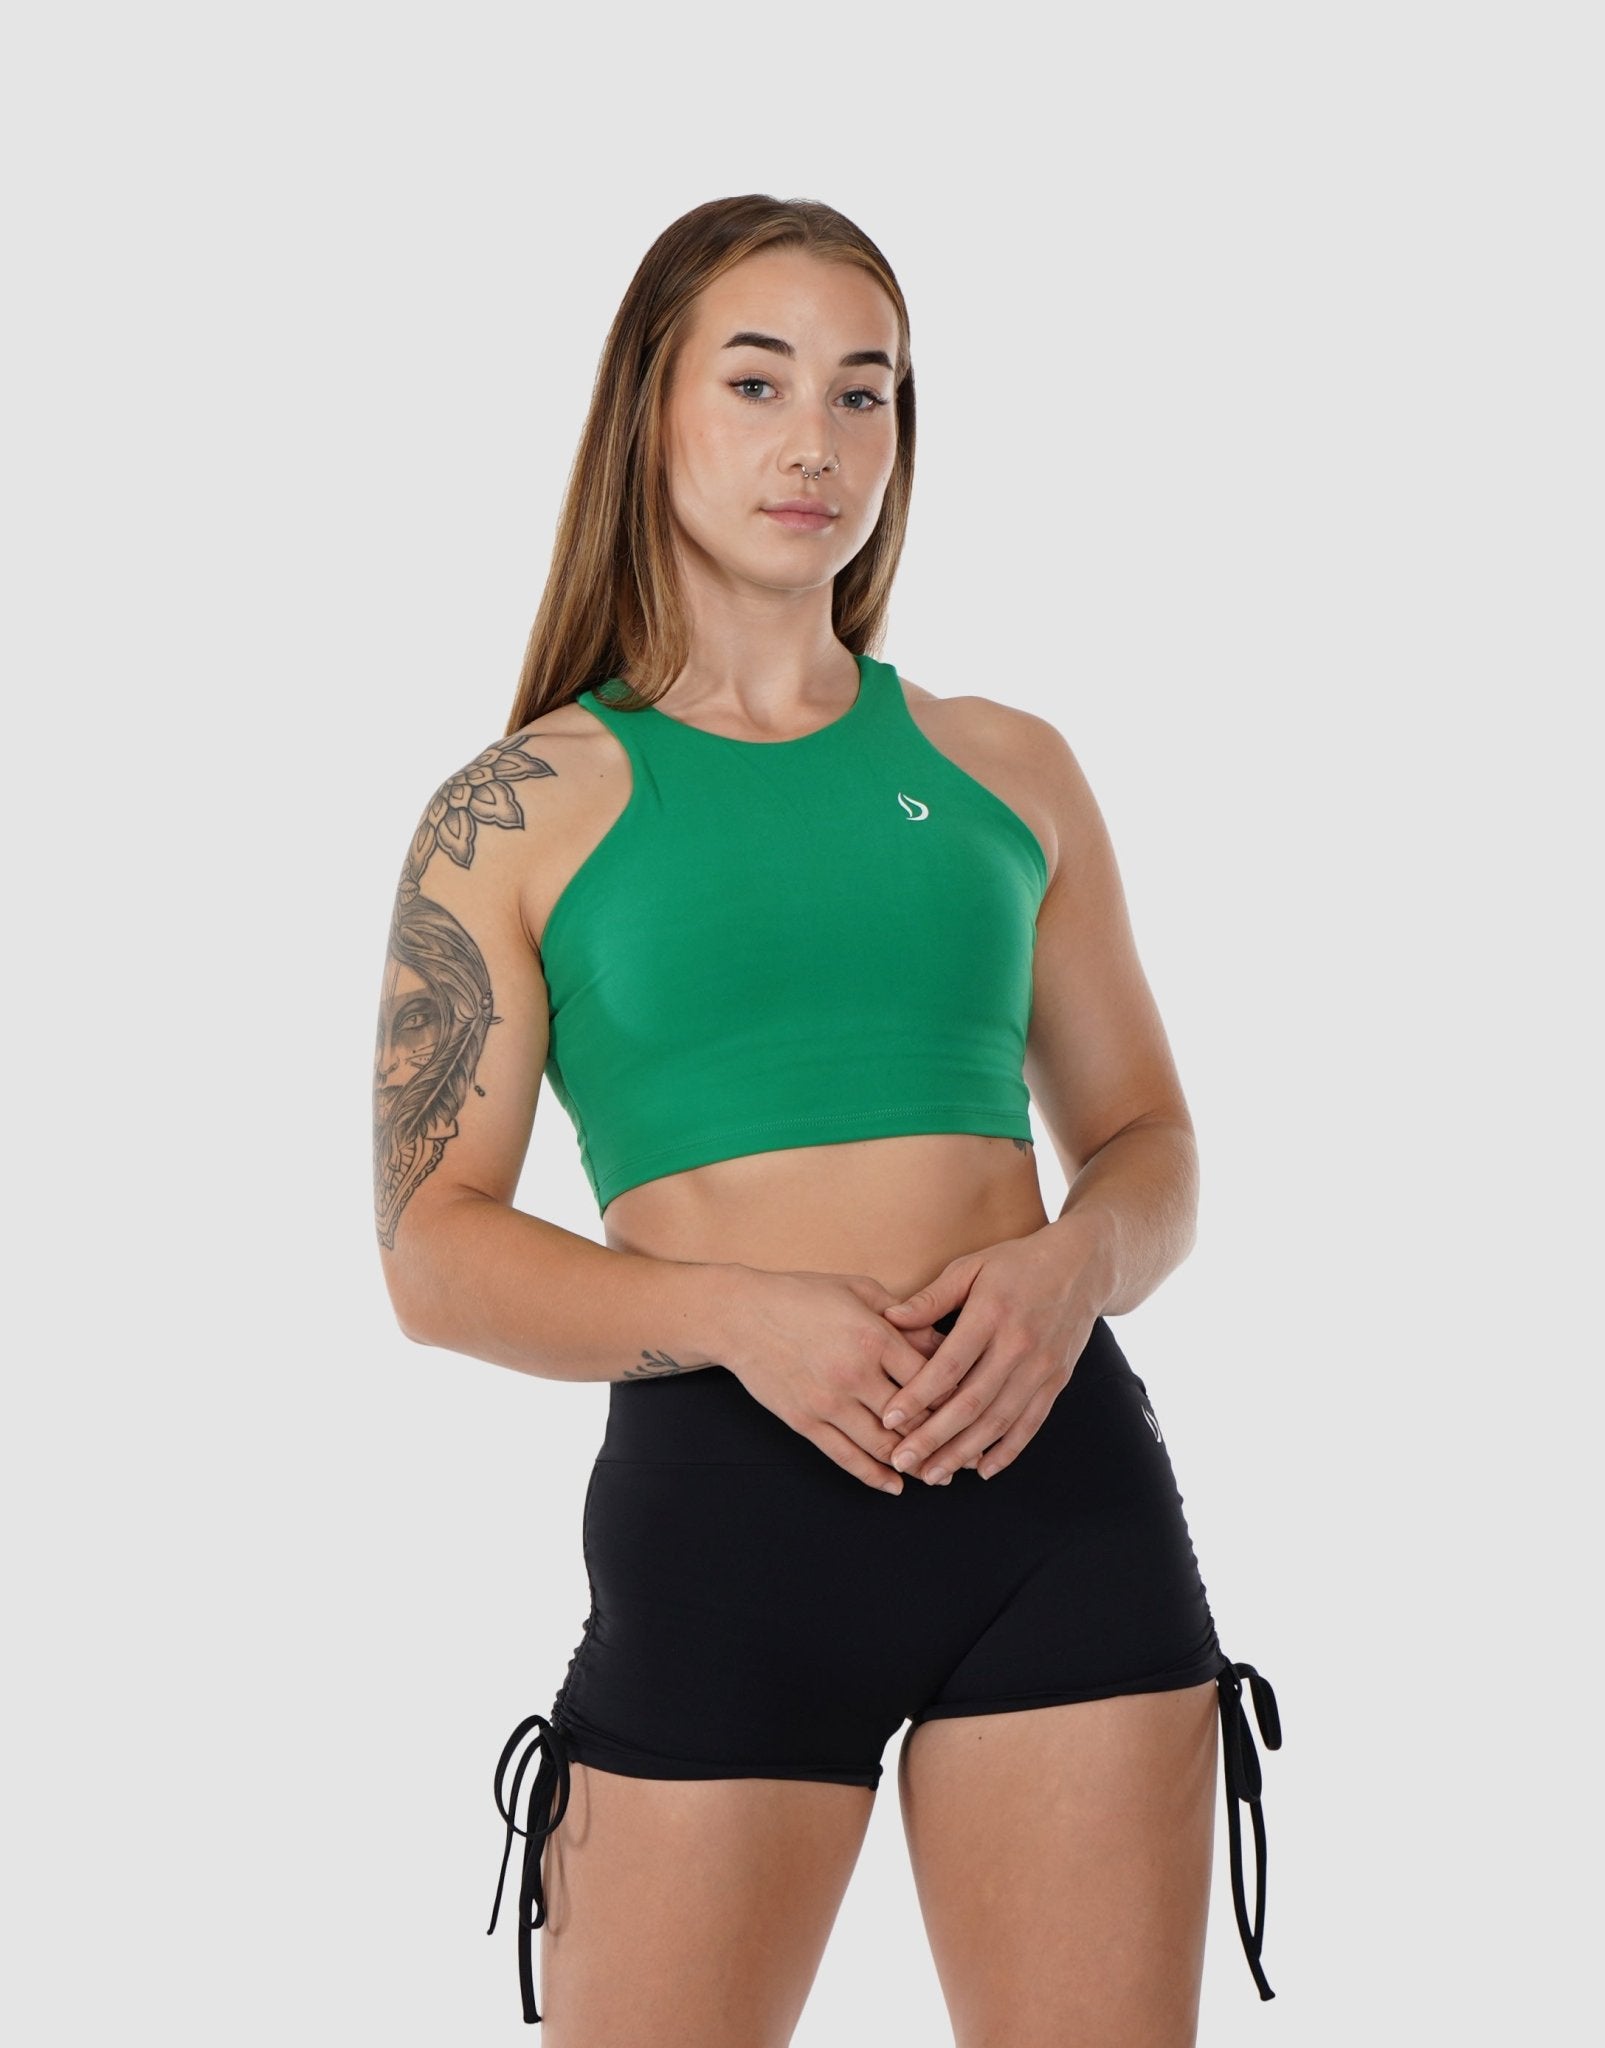 Sports Bra Holiday Deals by Category